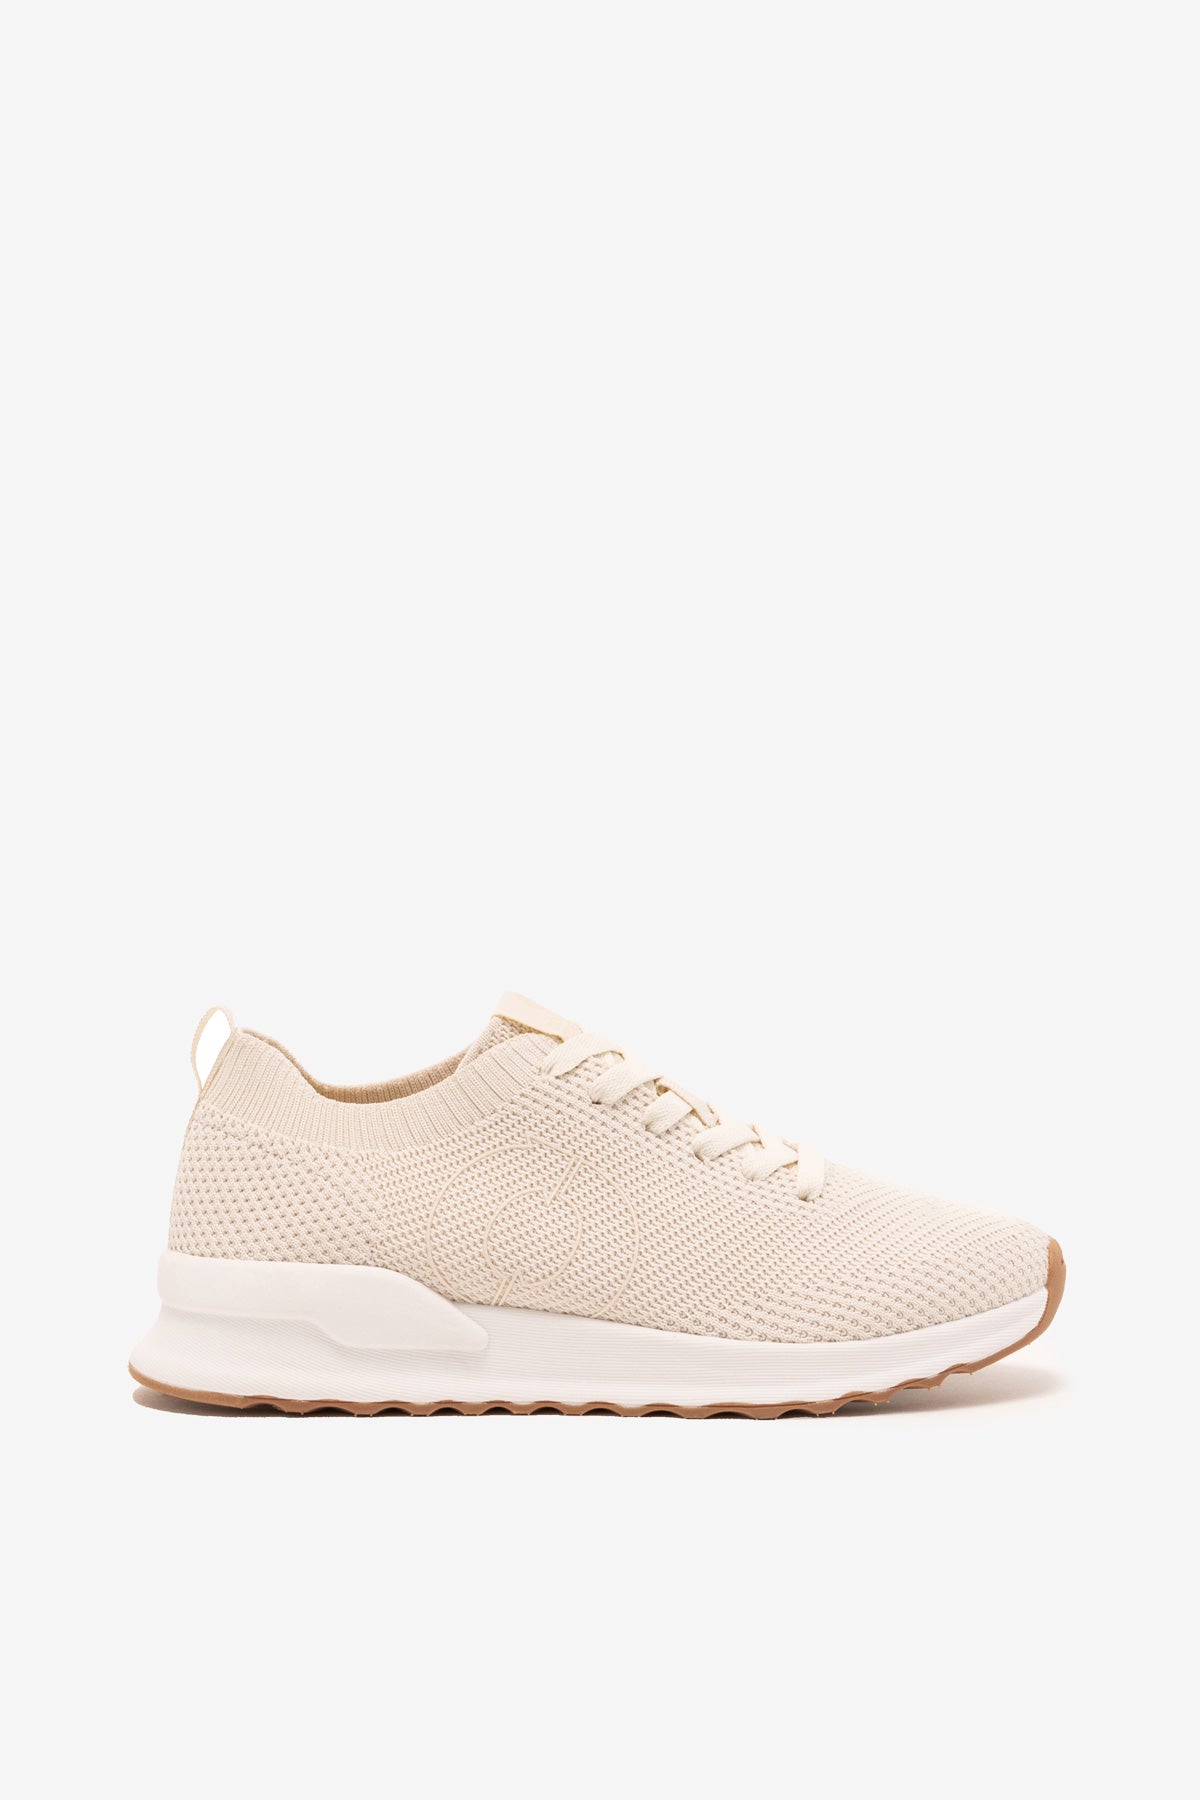 CHAUSSURES EN MAILLE CONDE BLANCHES